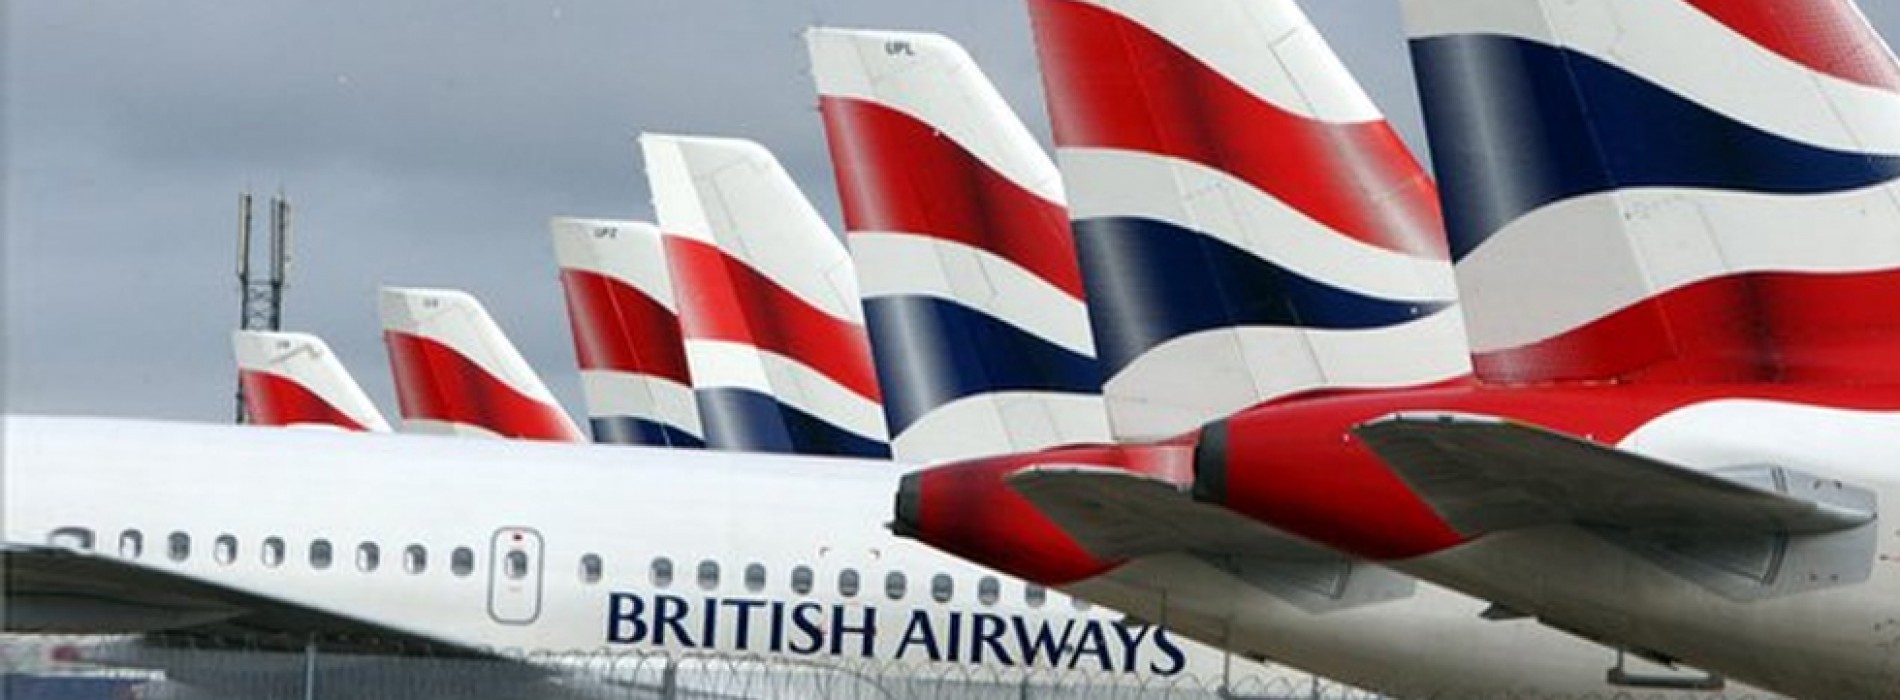 Enjoy more for less with British Airways’ New Year special bonanza offer